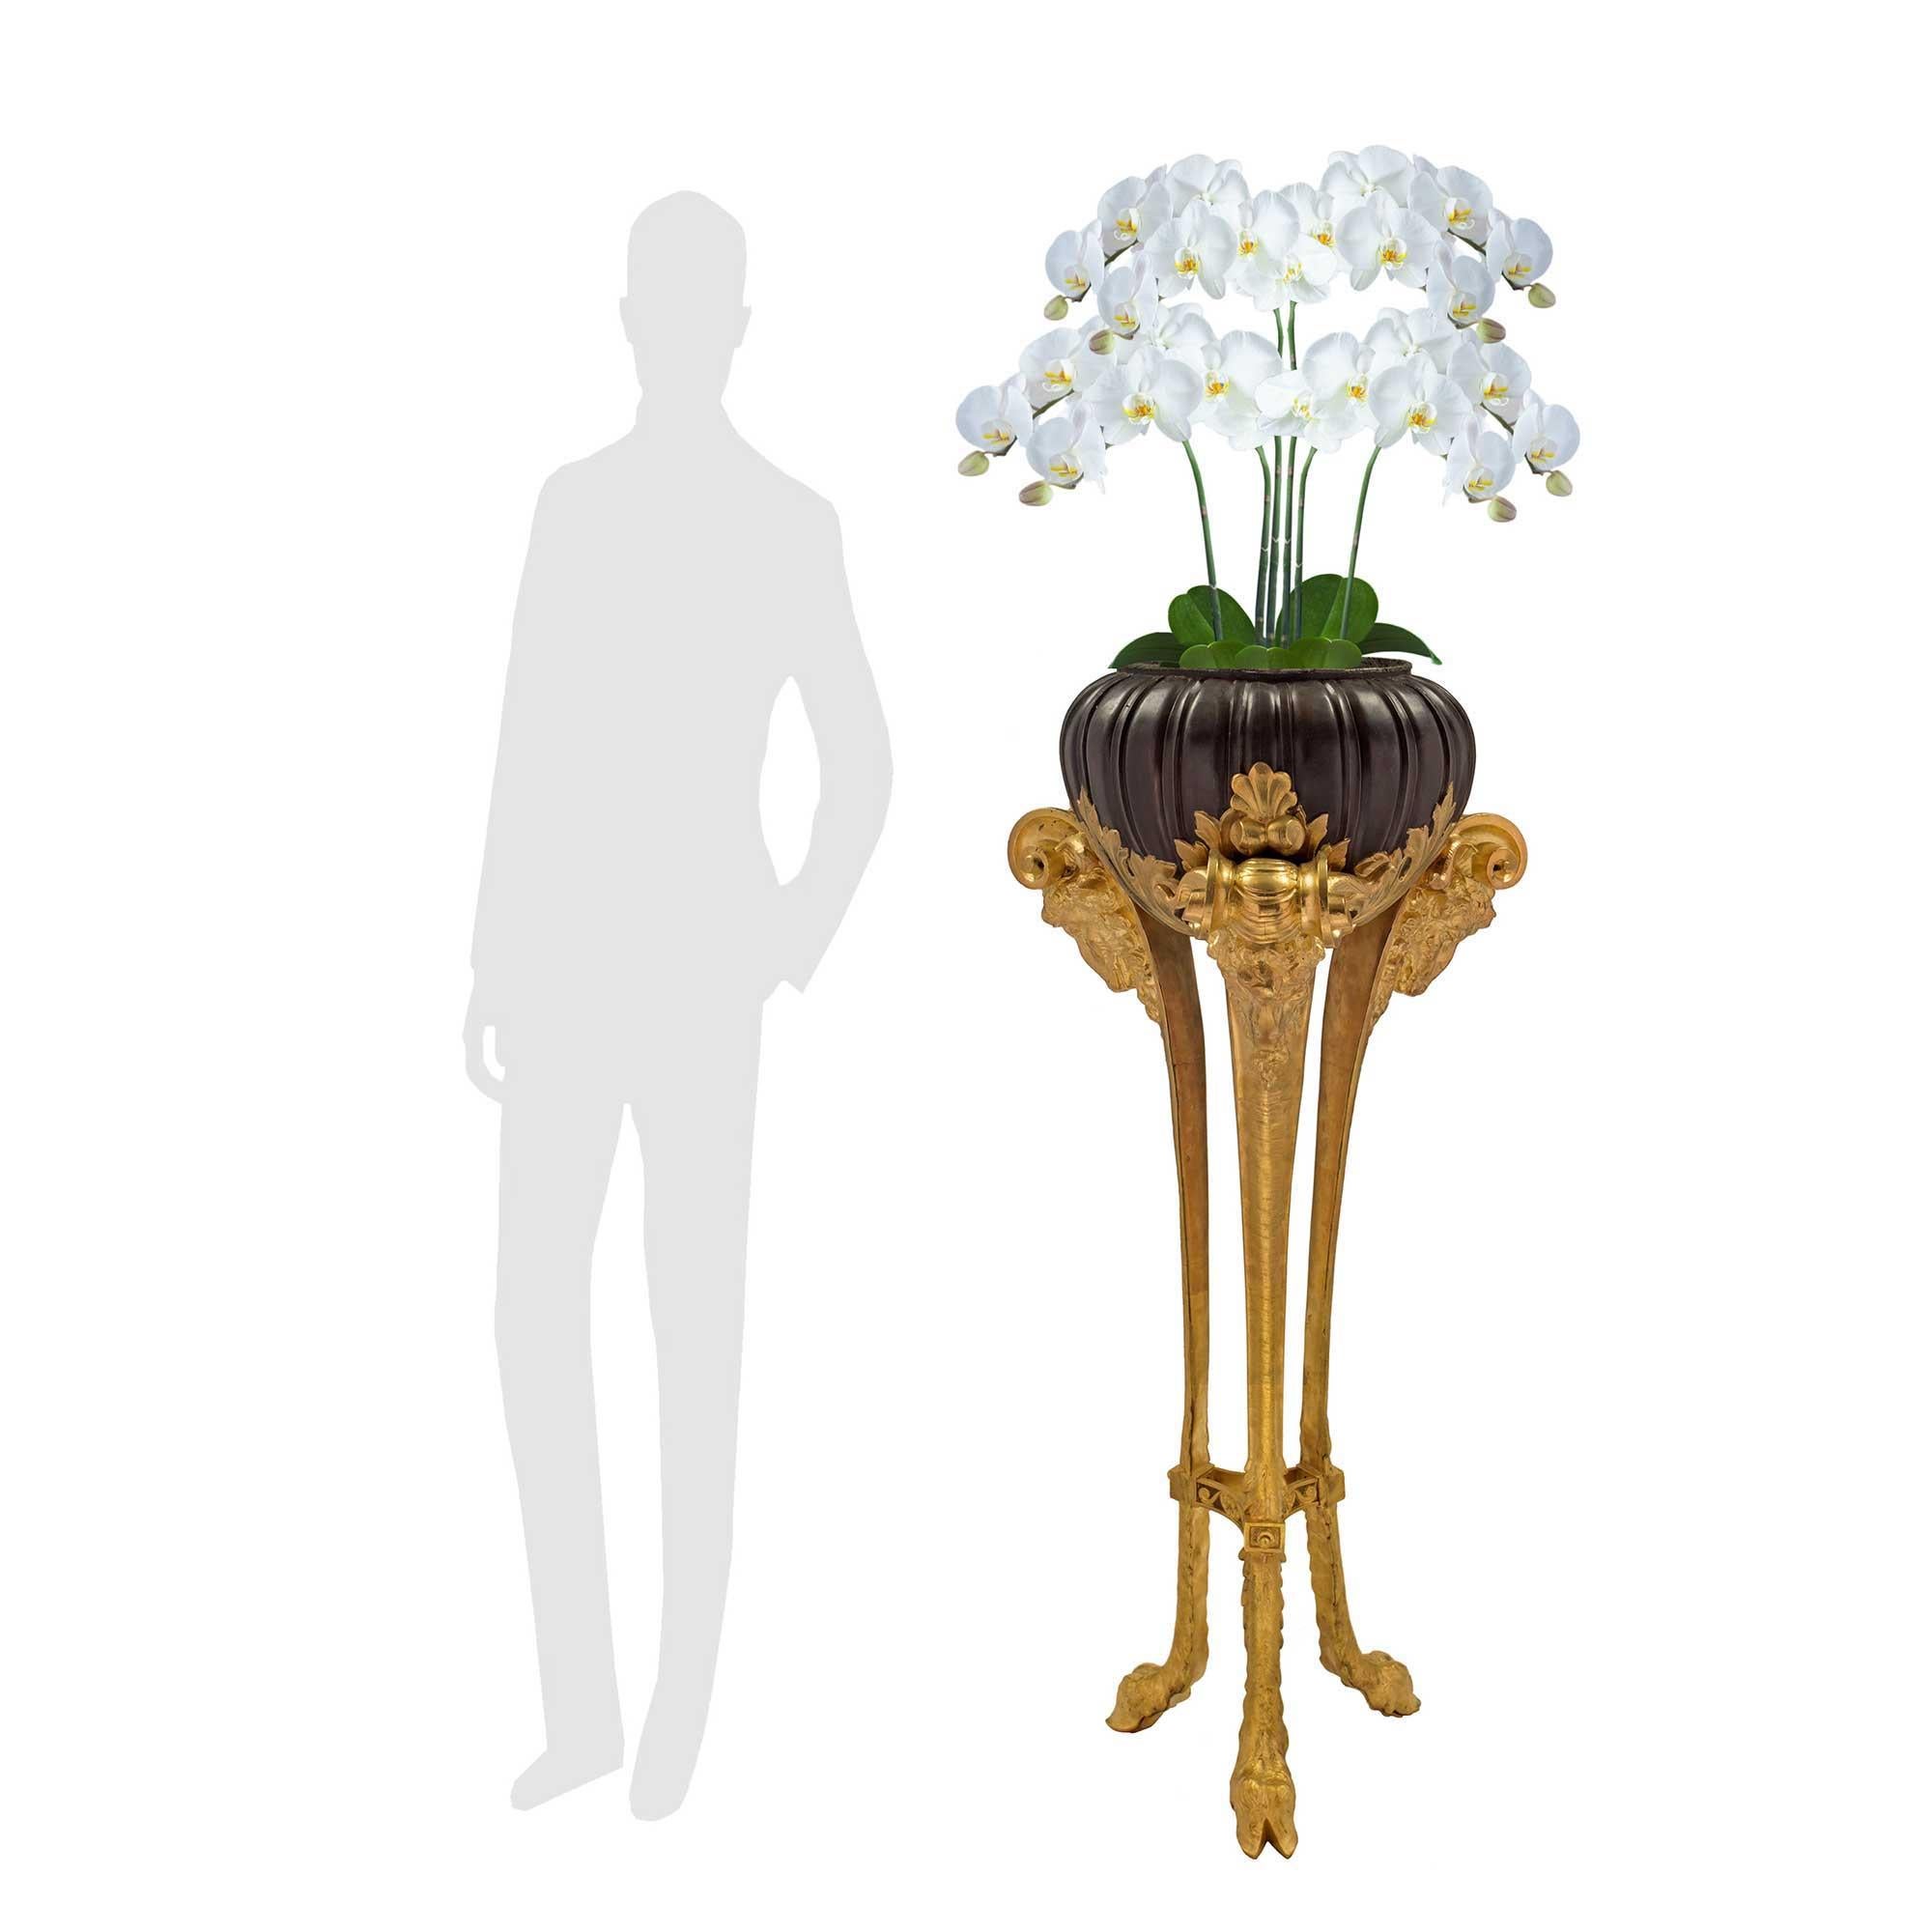 A handsome and most impressive large scale French 19th century Louis XVI st. ormolu and patinated bronze planter. The planter is raised by a most decorative tripod ormolu support with elegantly curved legs, superb hoof feet and a triangular concave